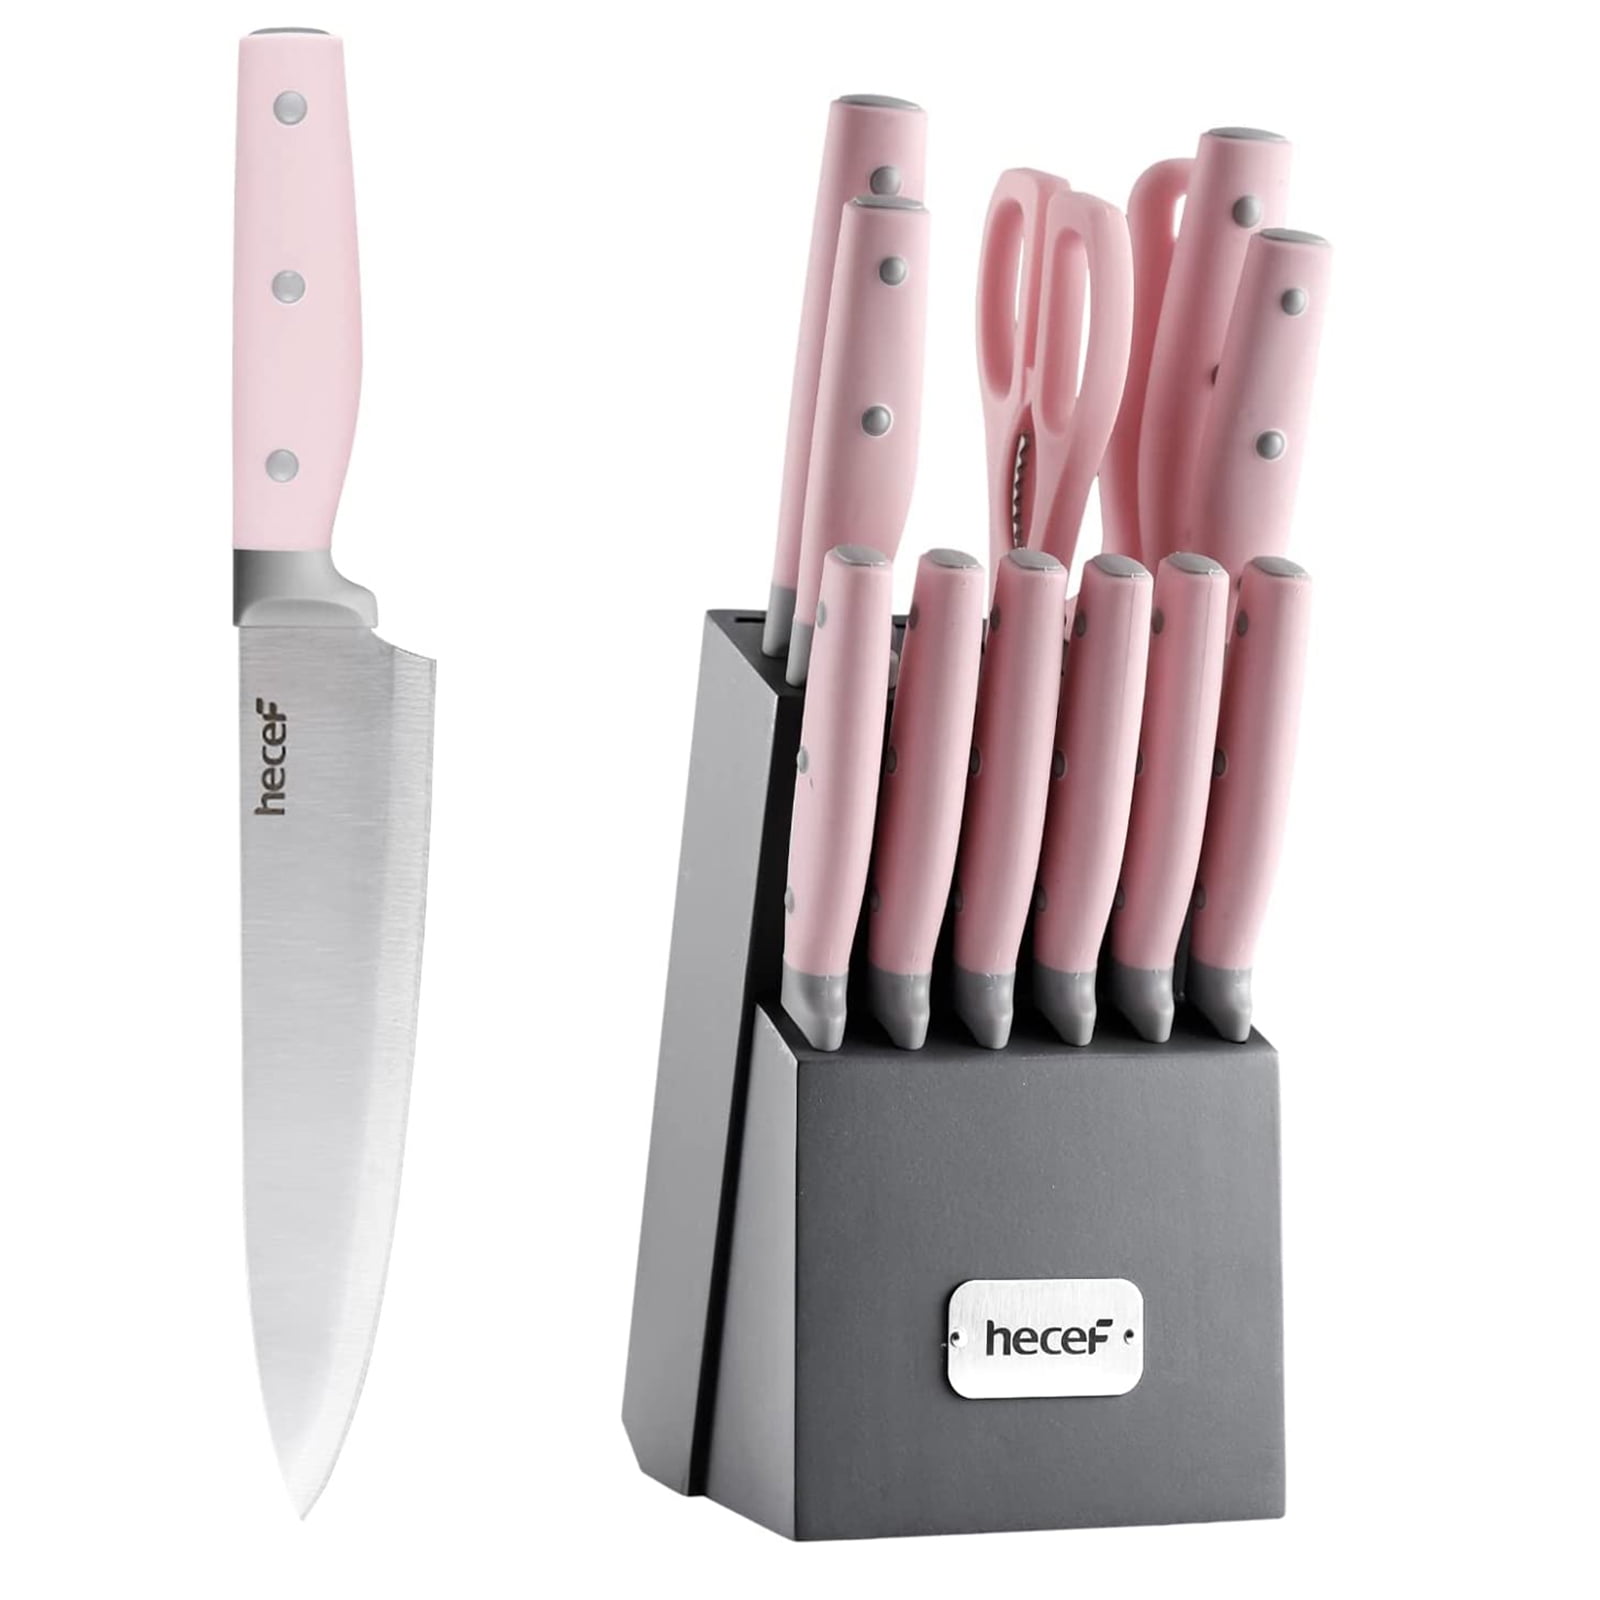 Hecef Kitchen Knife Block Set, 14Pcs High Carbon Stainless Steel Cutlery Knife Set with Sharpener